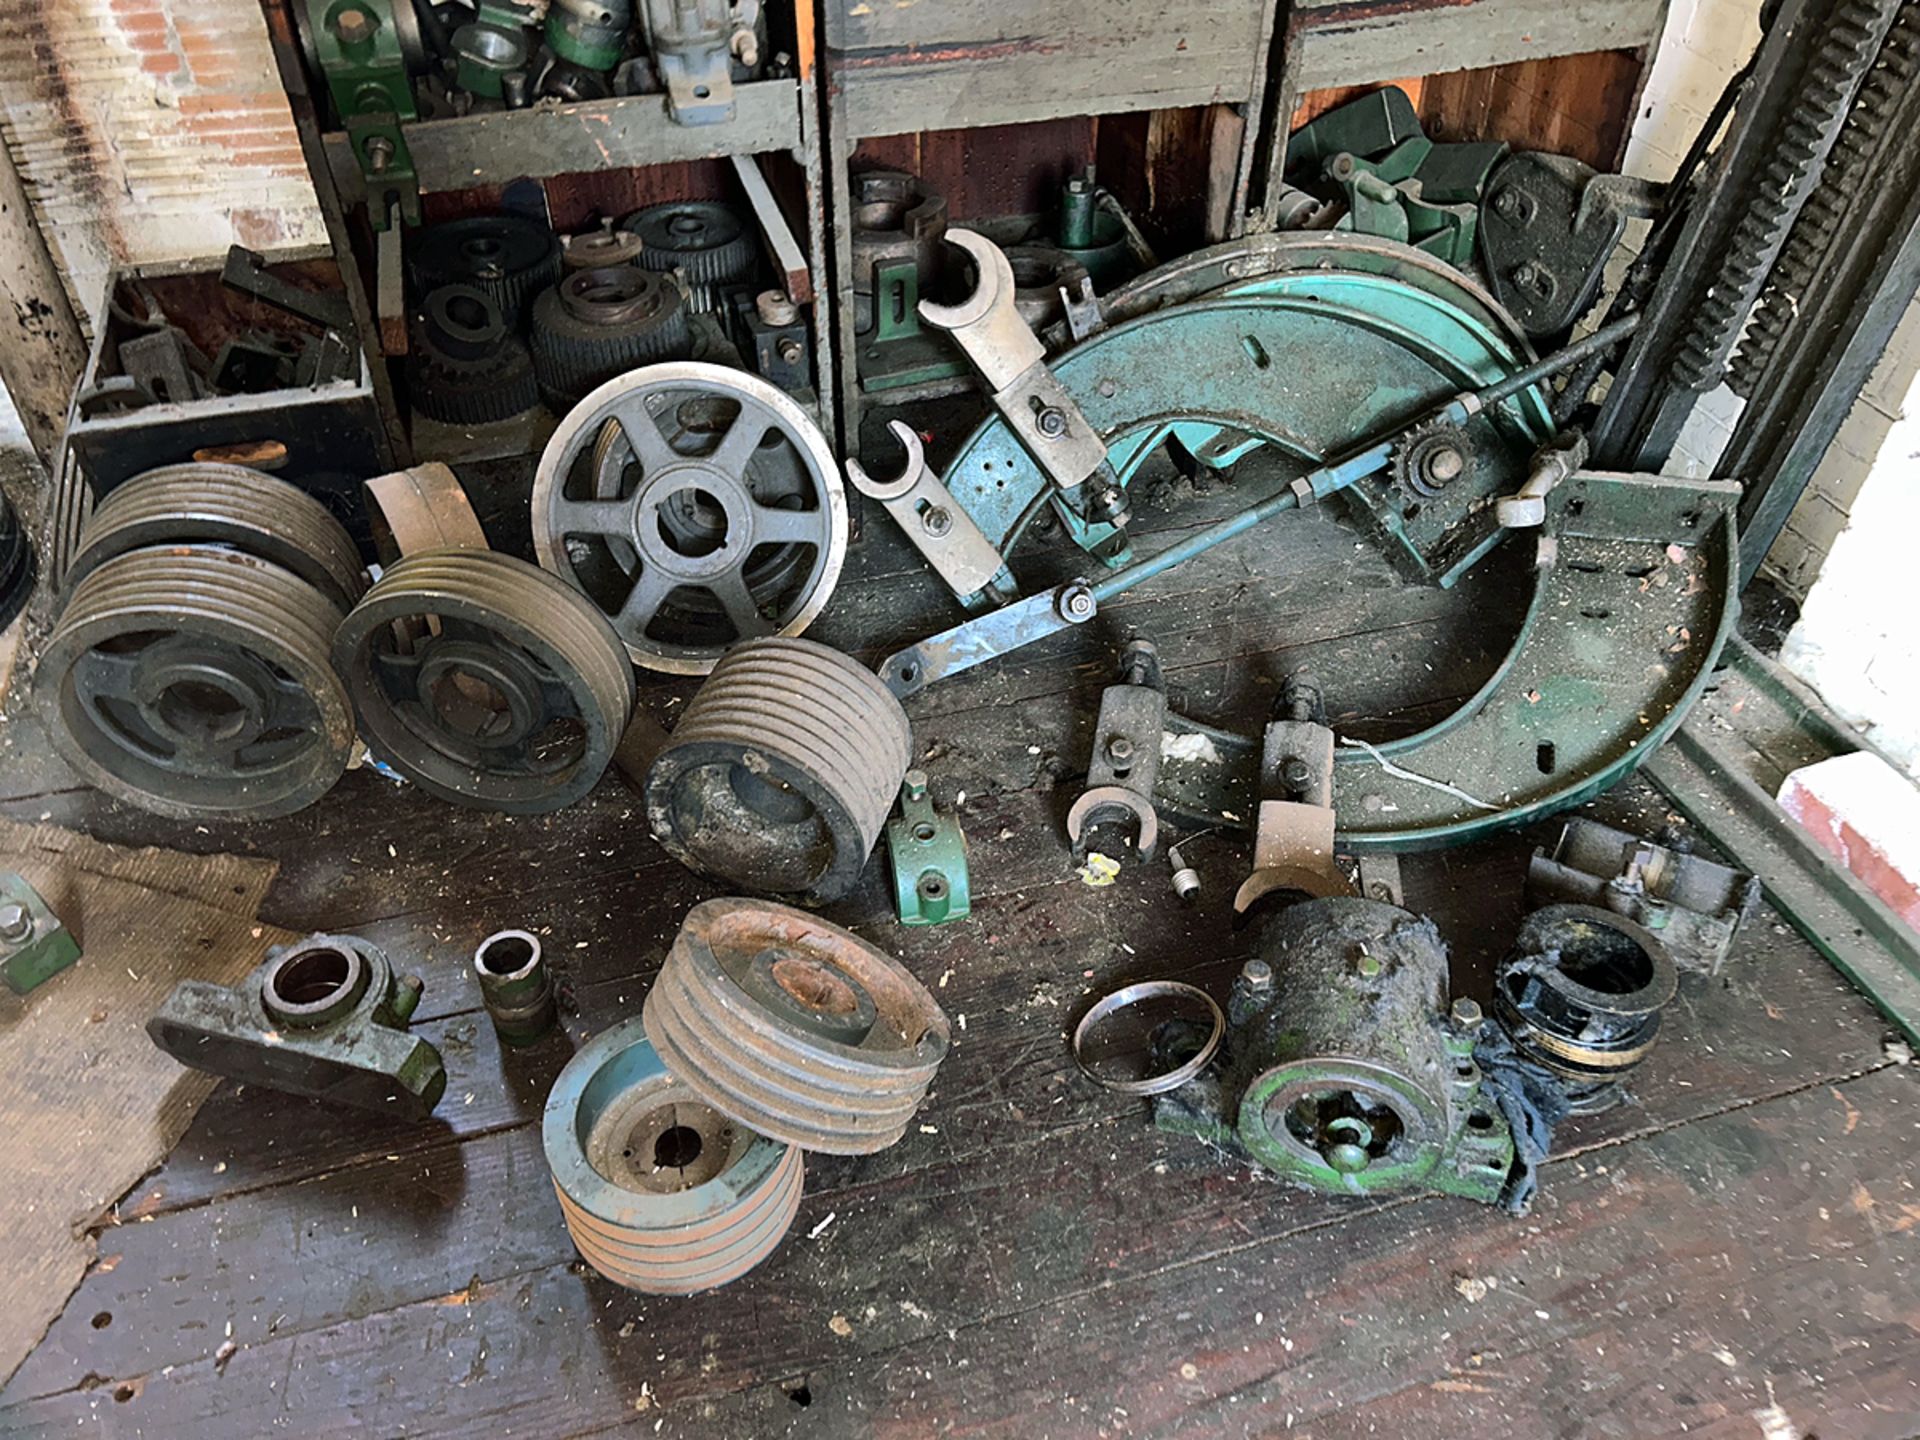 A Large Group of Ass't Machine Parts, Wheels, Pumps, Gears, Etc. - Image 3 of 8